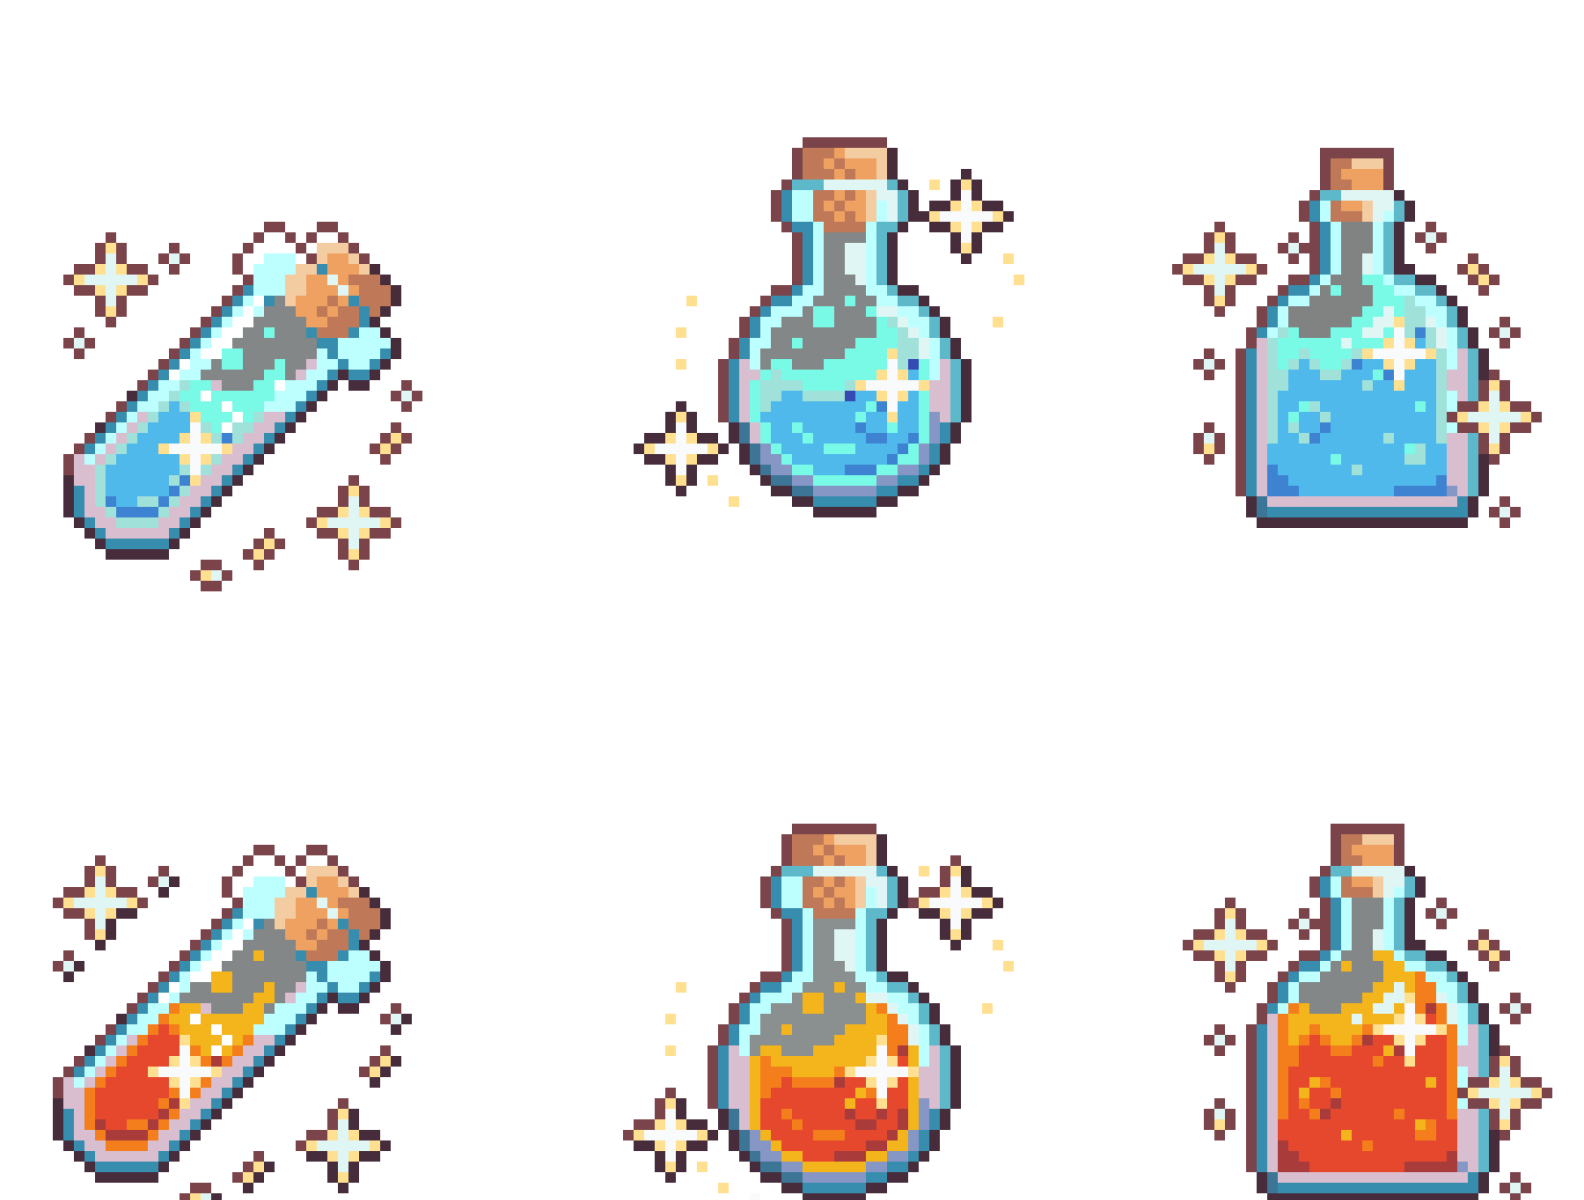 Game Potions by Edjie Arts on Dribbble